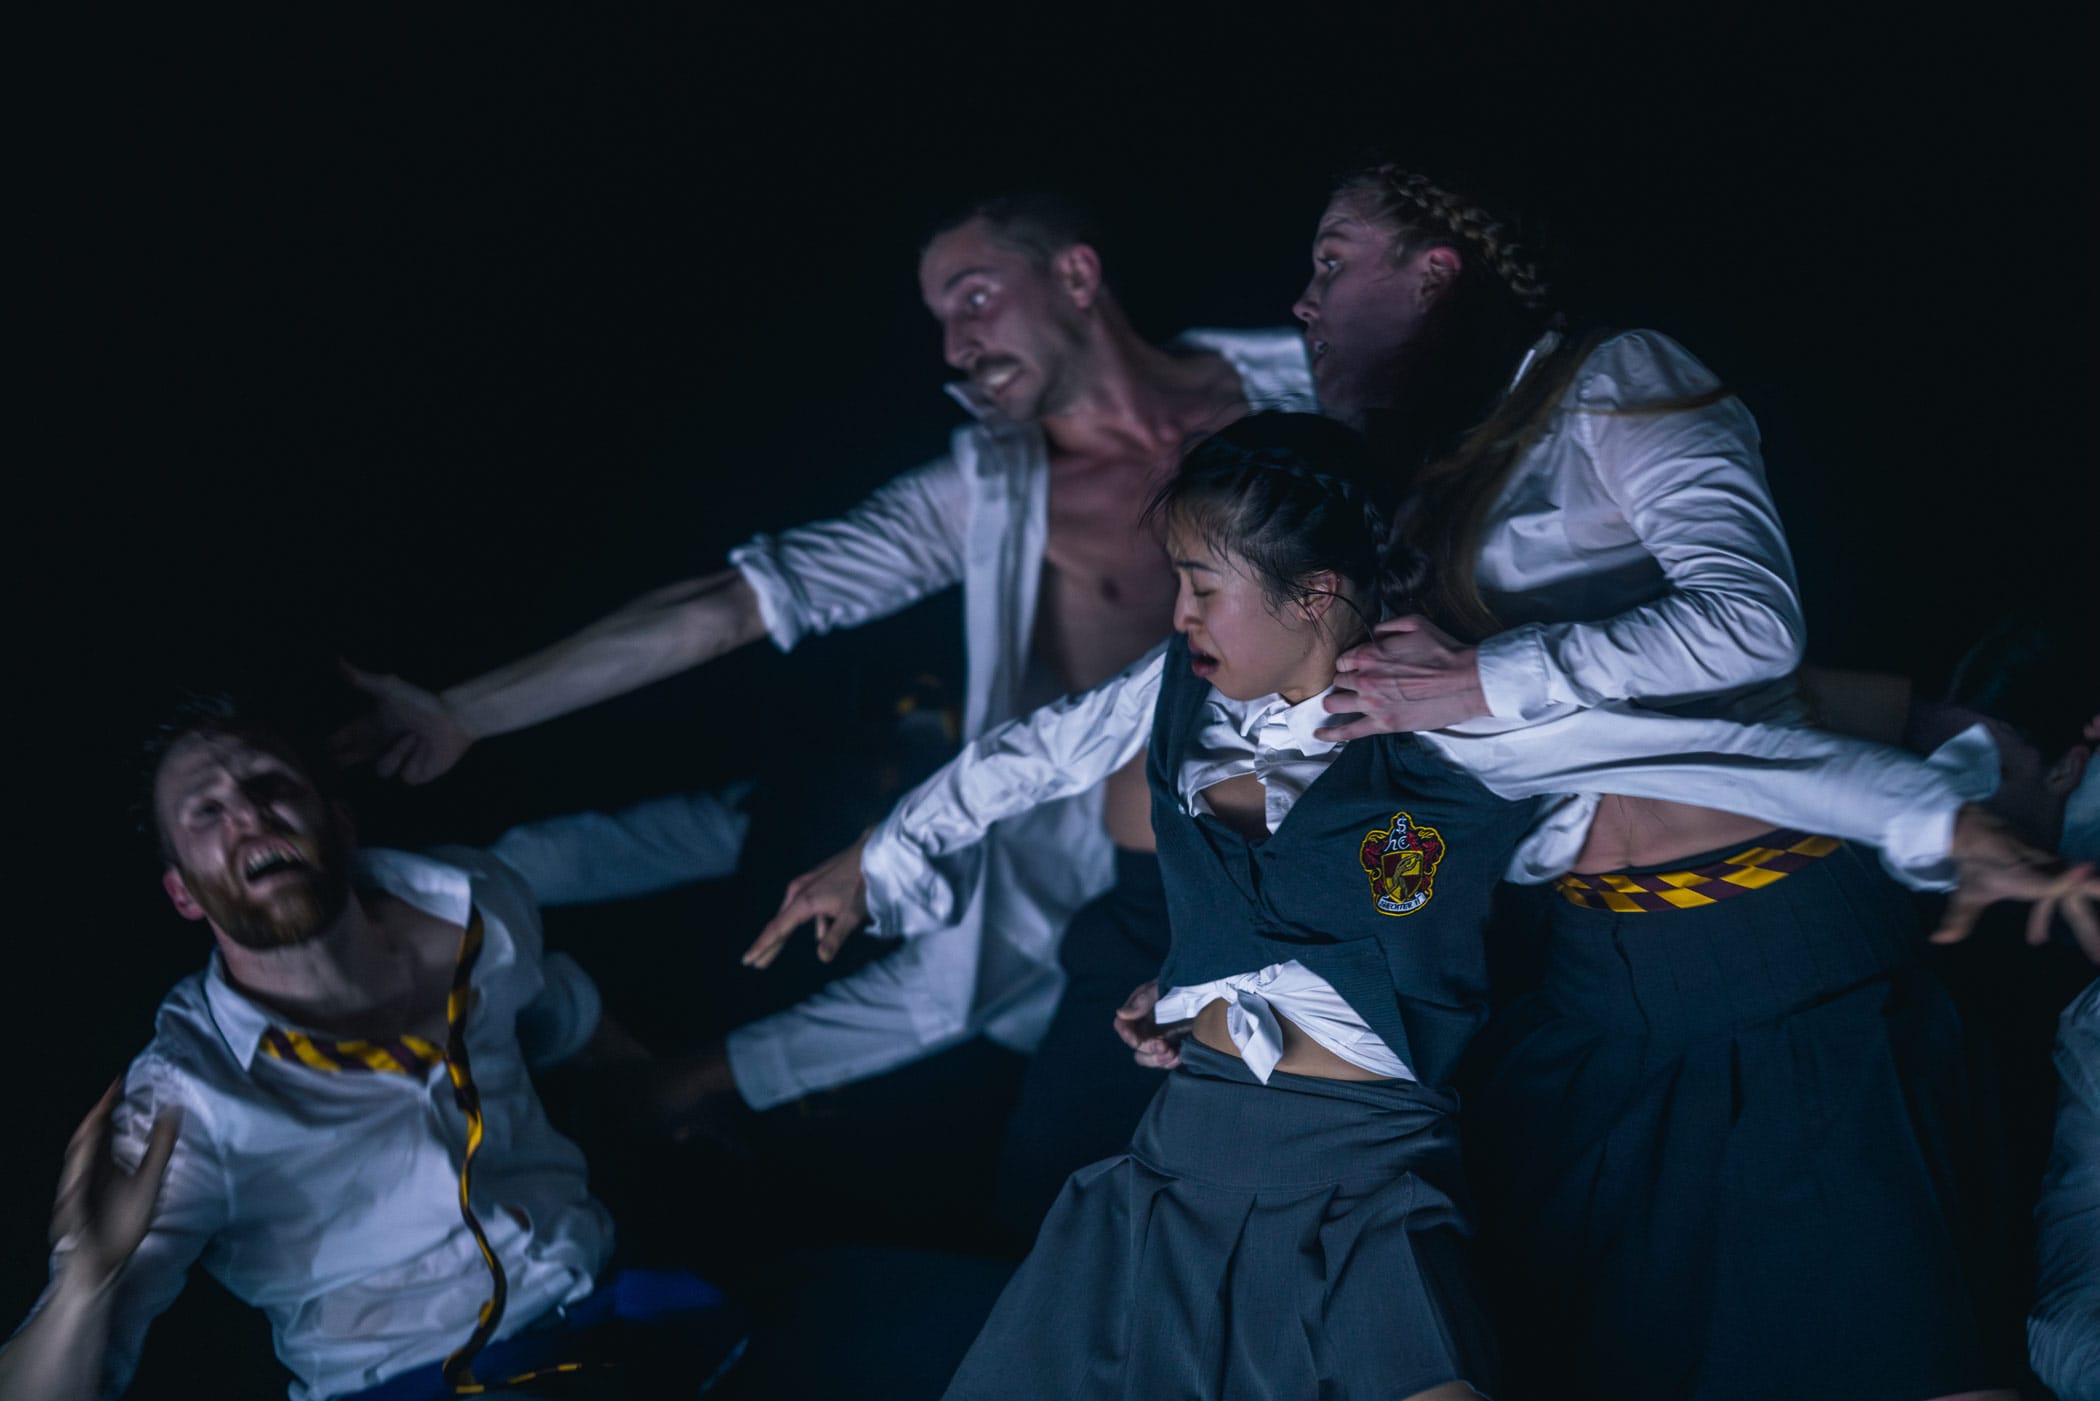 The ensemble performers are captured in the midst of conflict in school uniforms under a cold blue light.